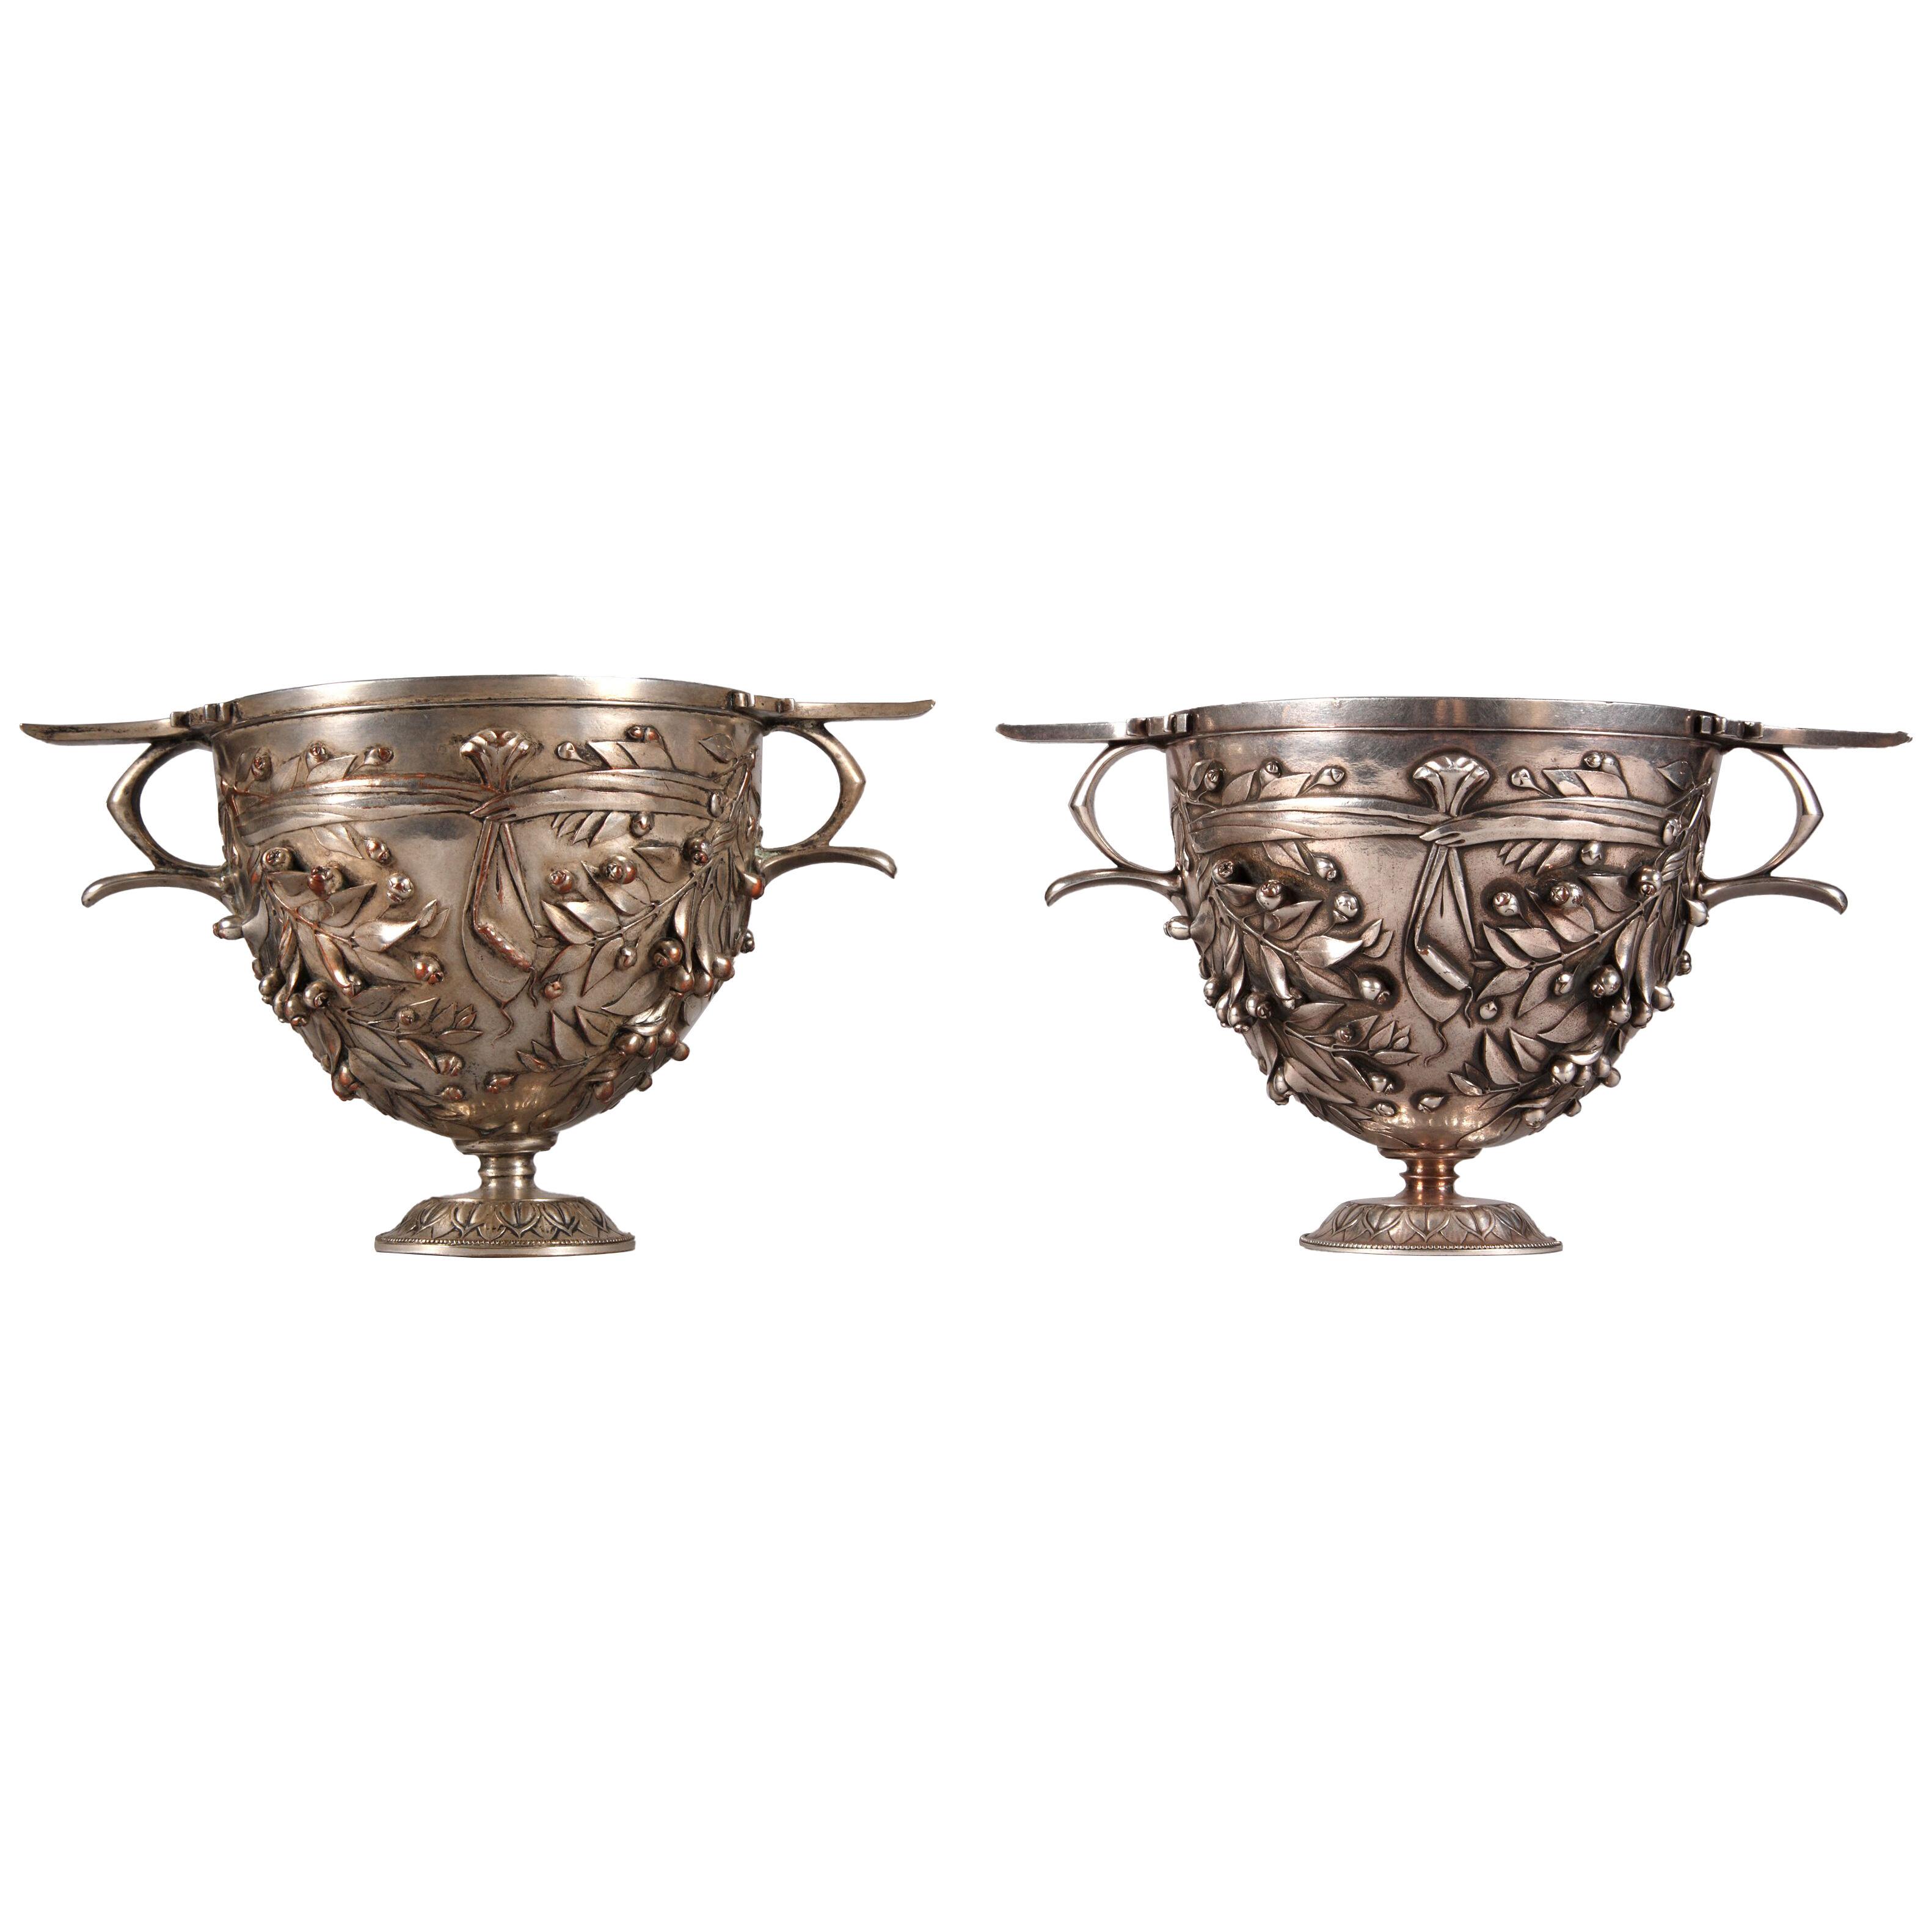  Pair of "Alésia" Cups by F. Barbedienne and D. Attarge, France, Circa 1878